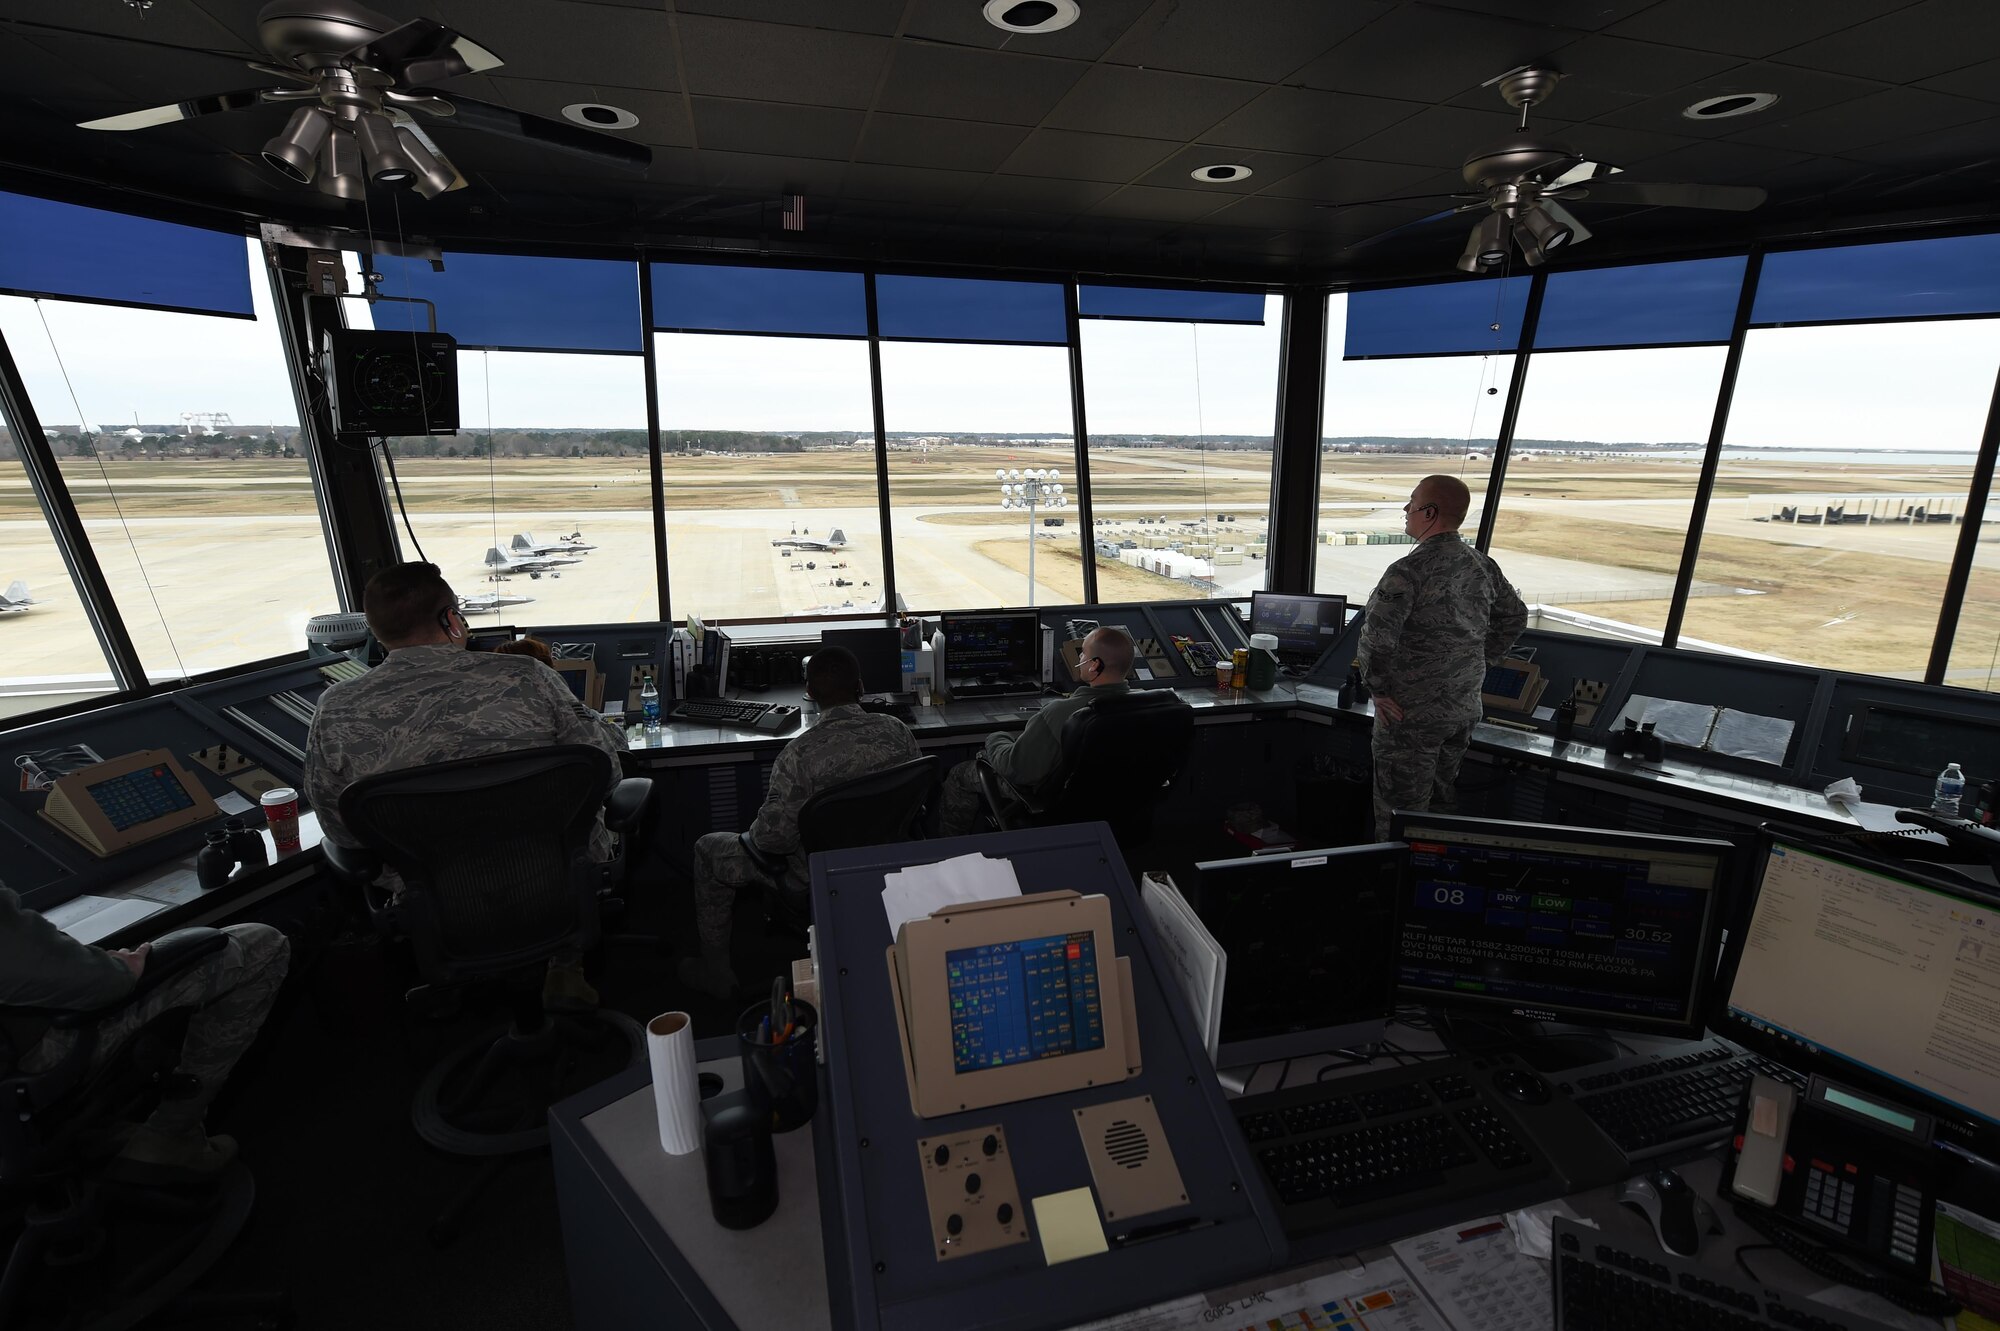 U.S. Air Force Airmen with the 1st Operations Support Squadron man the 1st Fighter Wing air traffic control tower at Joint Base Langley-Eustis, Va., Dec. 16, 2016. Controllers track the departure and arrival times and locations of aircraft, as well as when aircraft are airborne. (U.S. Air Force photo by Staff Sgt. Natasha Stannard)